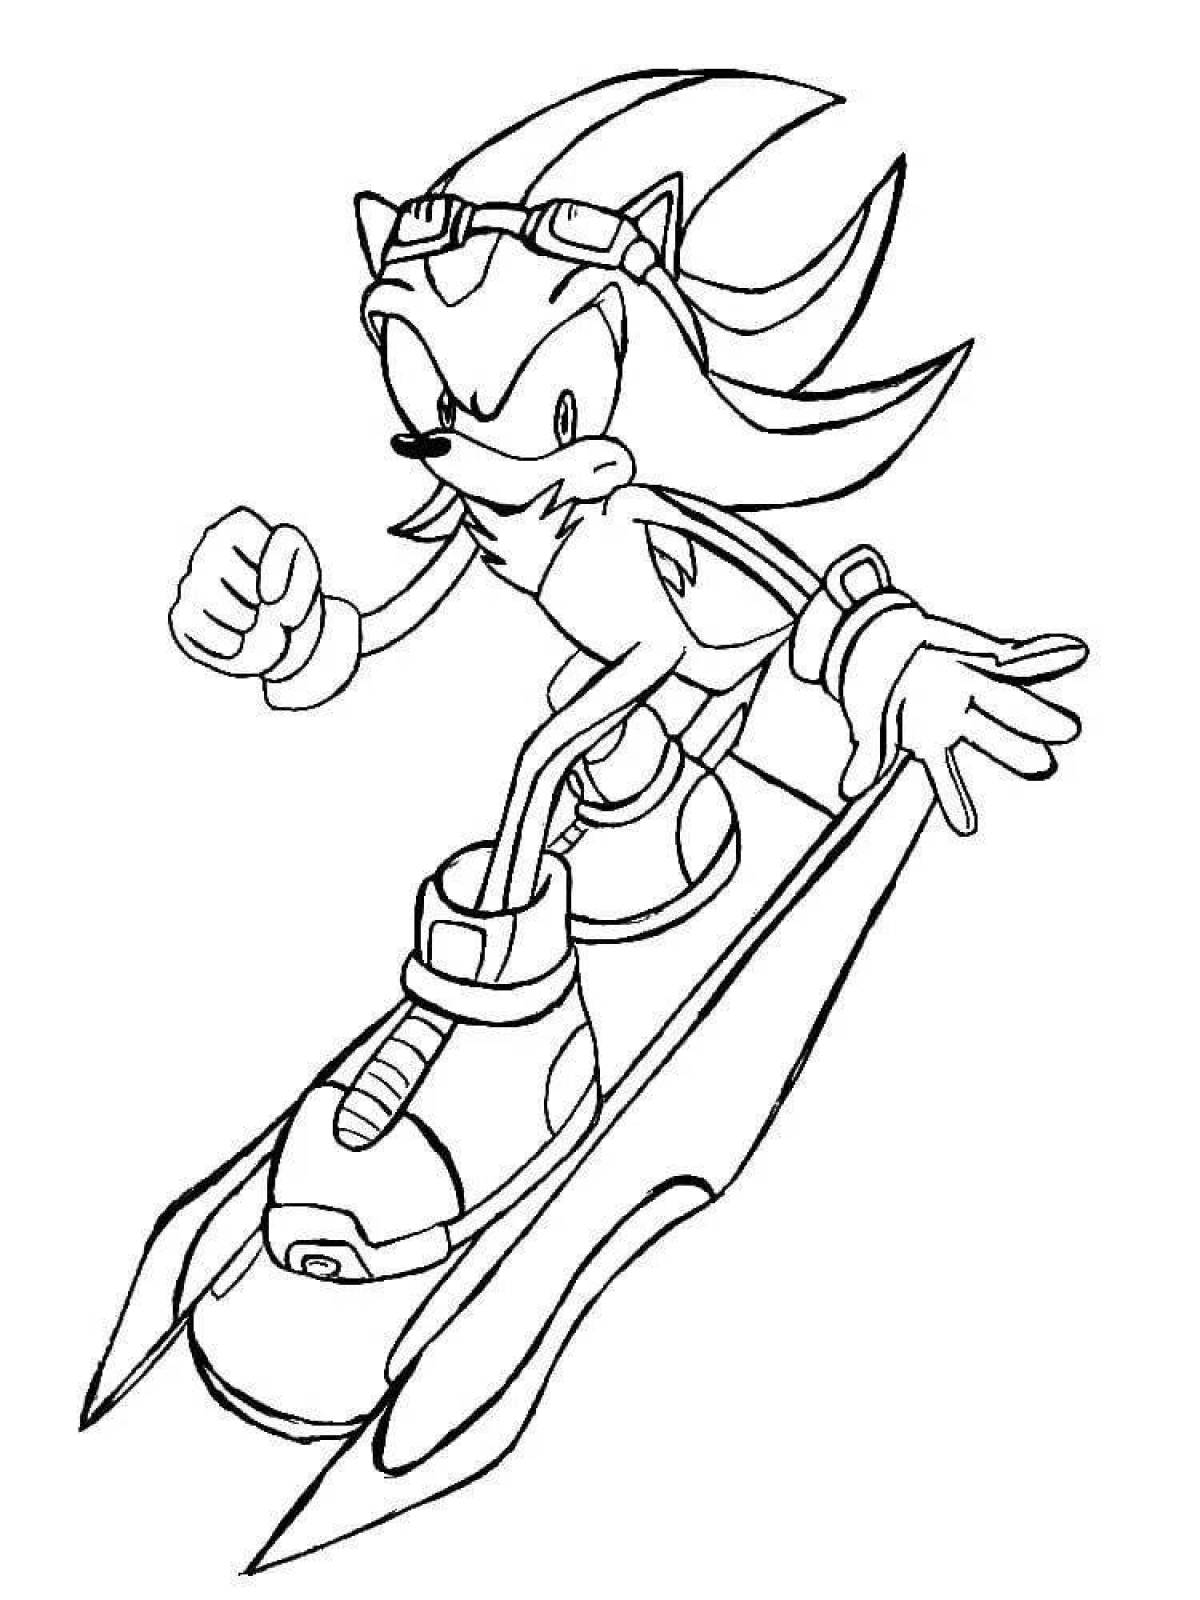 Charming sonic characters coloring book